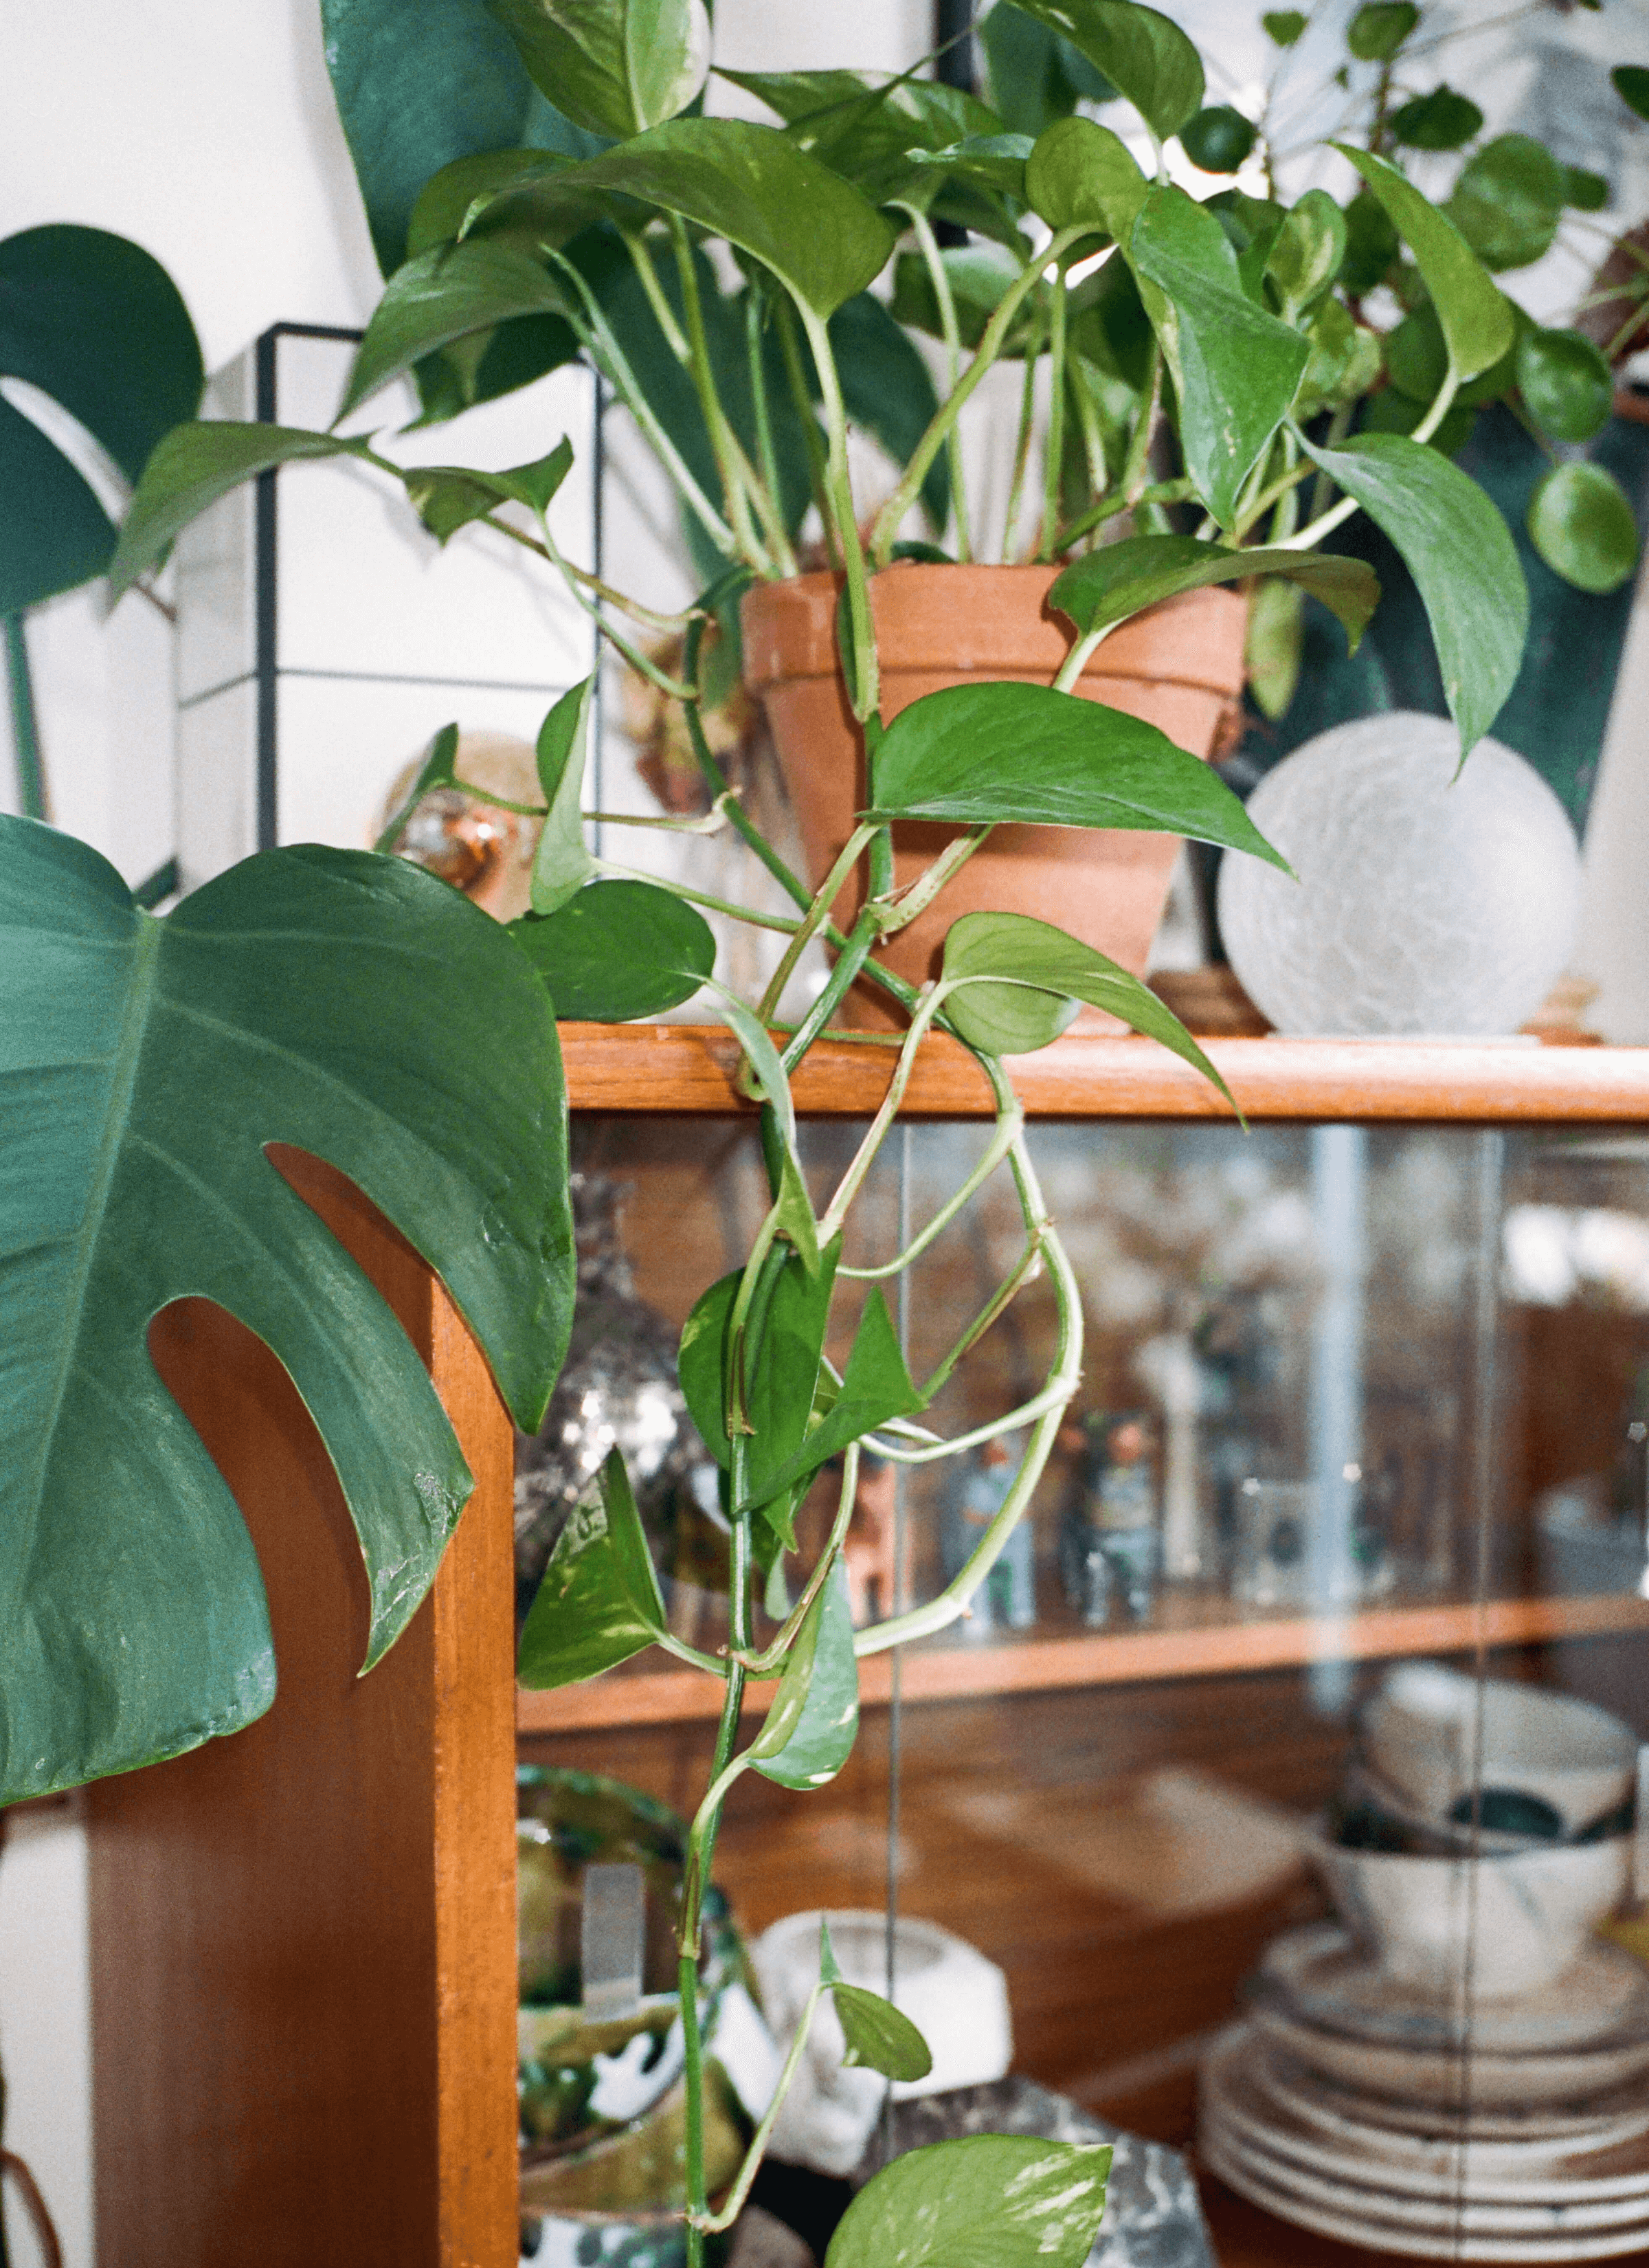 Monstera and devil’s Ivy leaves grow from a terracotta pot above a cupboard full of stuff with plates, bowls, etc.